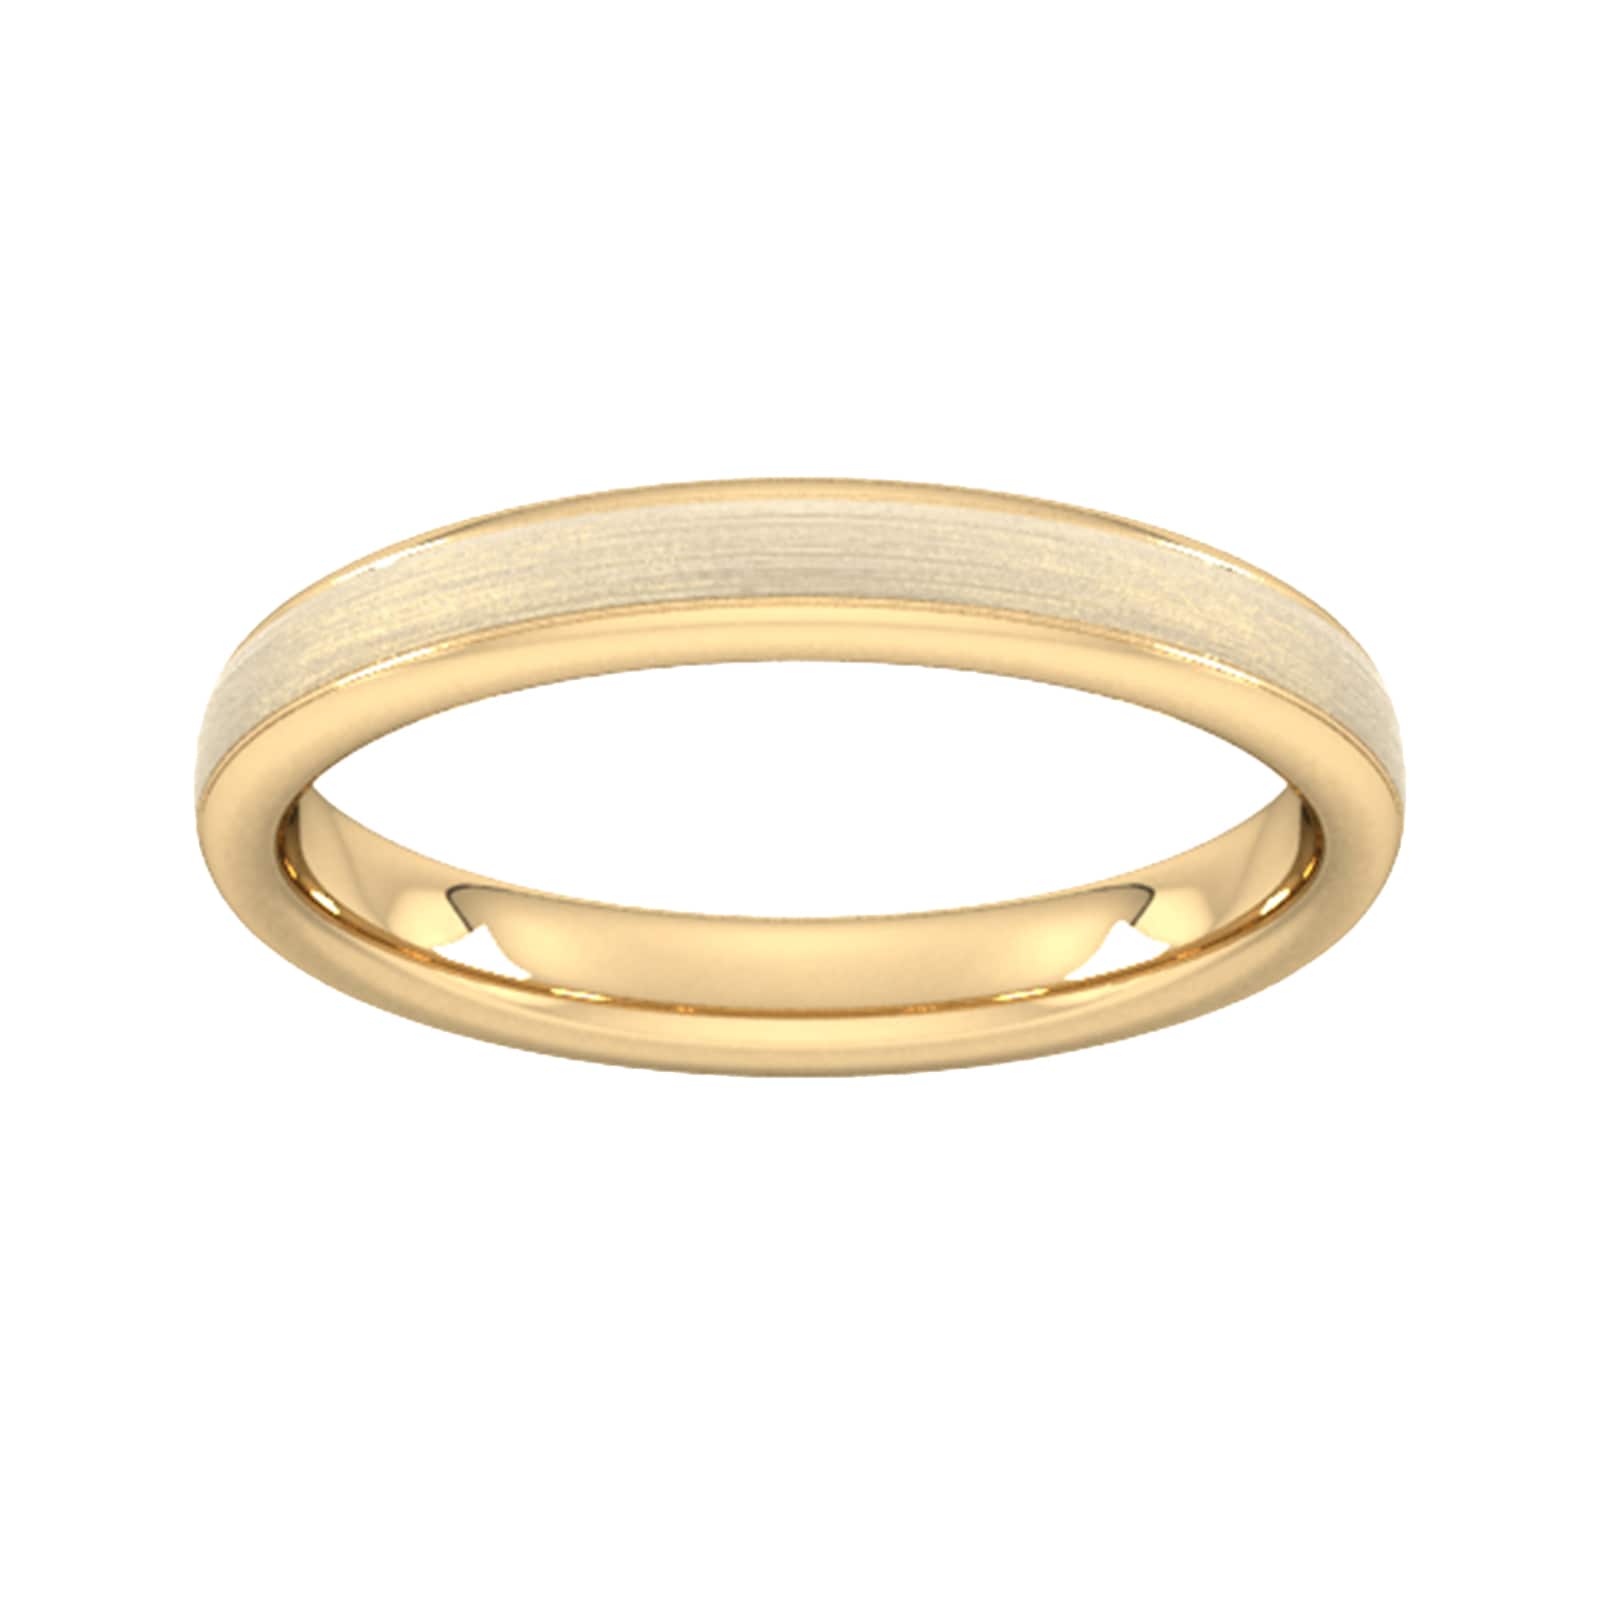 3mm Traditional Court Heavy Matt Centre With Grooves Wedding Ring In 18 Carat Yellow Gold - Ring Size R